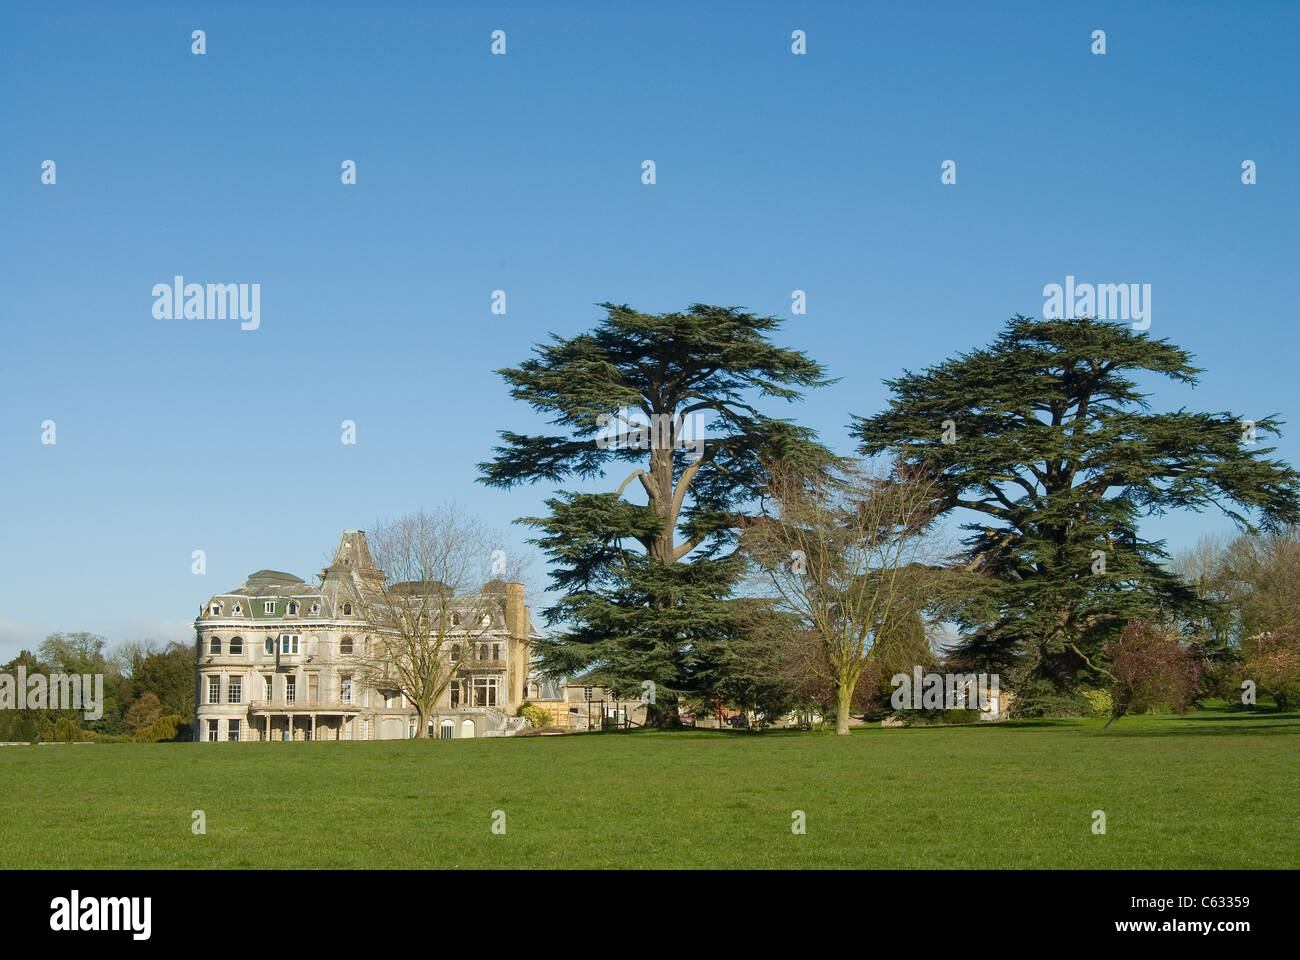 Park Place at Remenham near Henley in Berkshire, UK front facade with parkland and two cedar trees Stock Photo